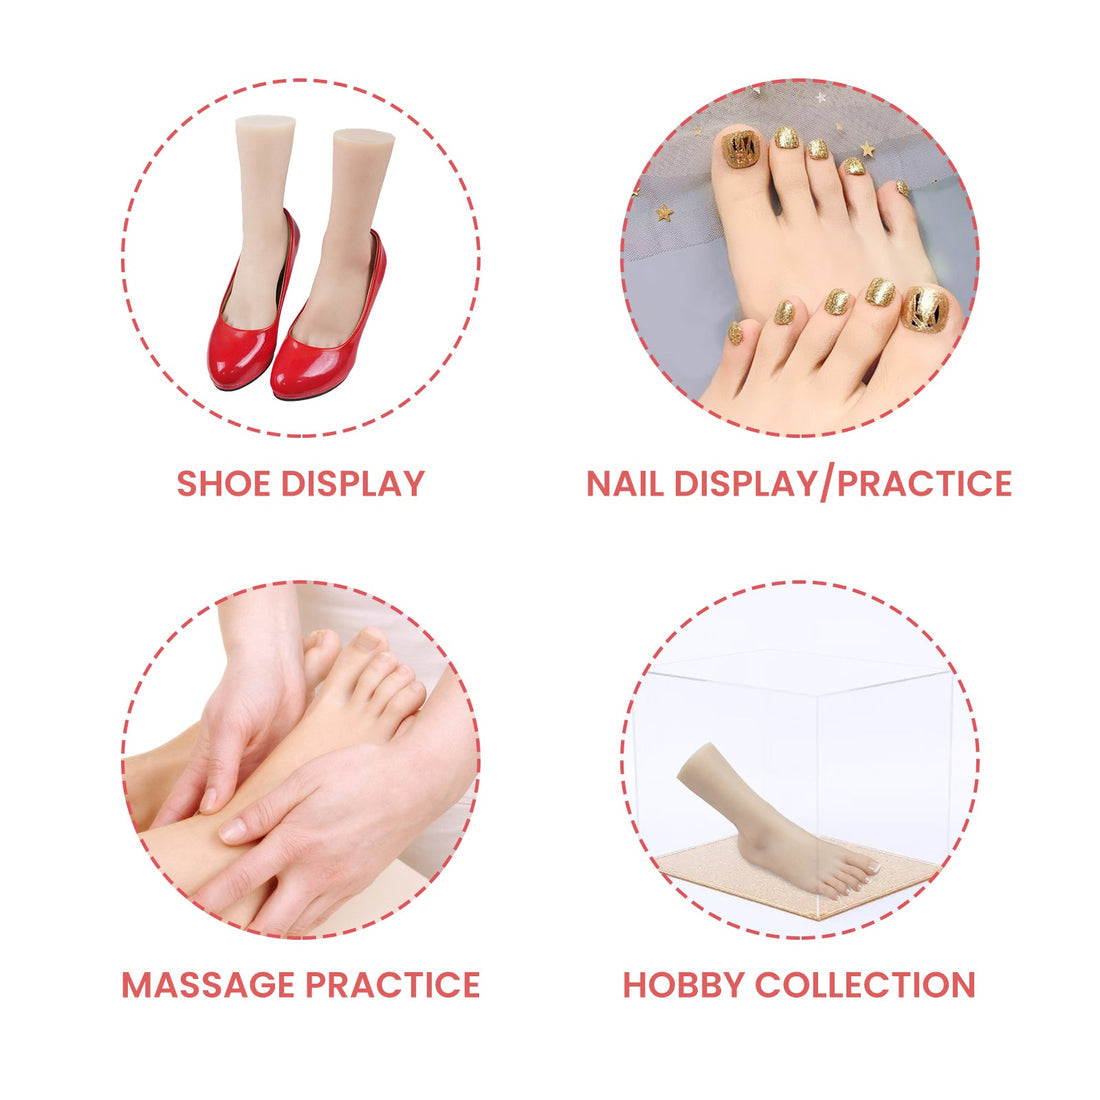 Silicone Foot Model Mannequin